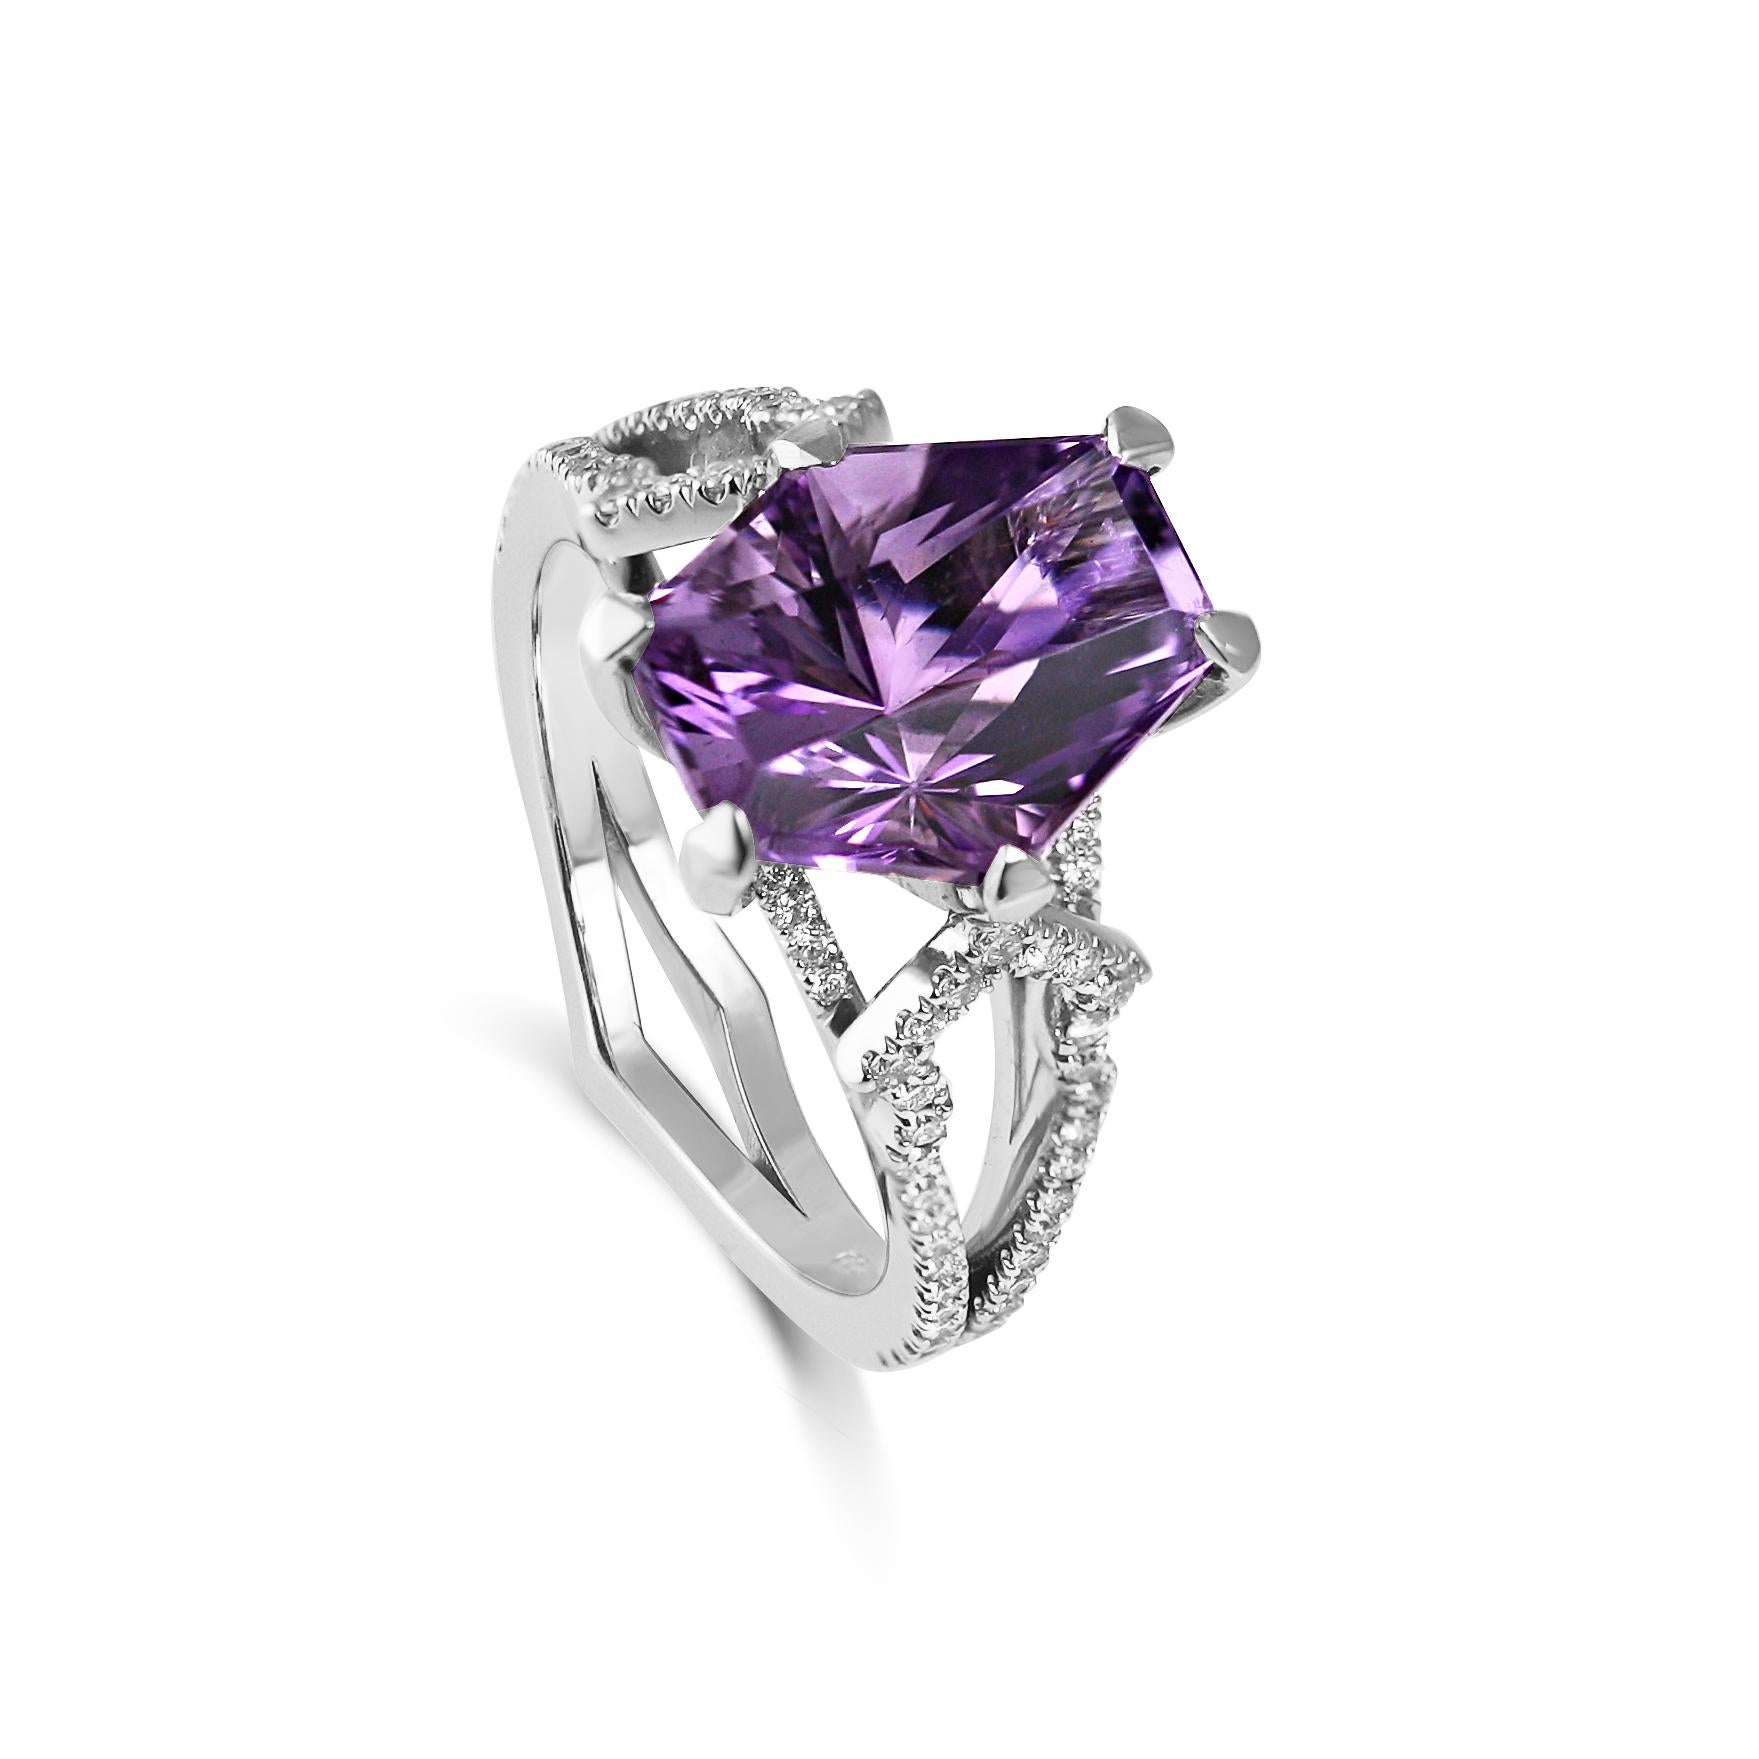 Our Asteria Ring is a 1 of 1 collection showpiece.

Firstly, we had the central amethyst uniquely cut by our Lapidary craftsmen. It exudes an otherworldly quality, its facets drawing you in to another dimension. You will not find its match anywhere,